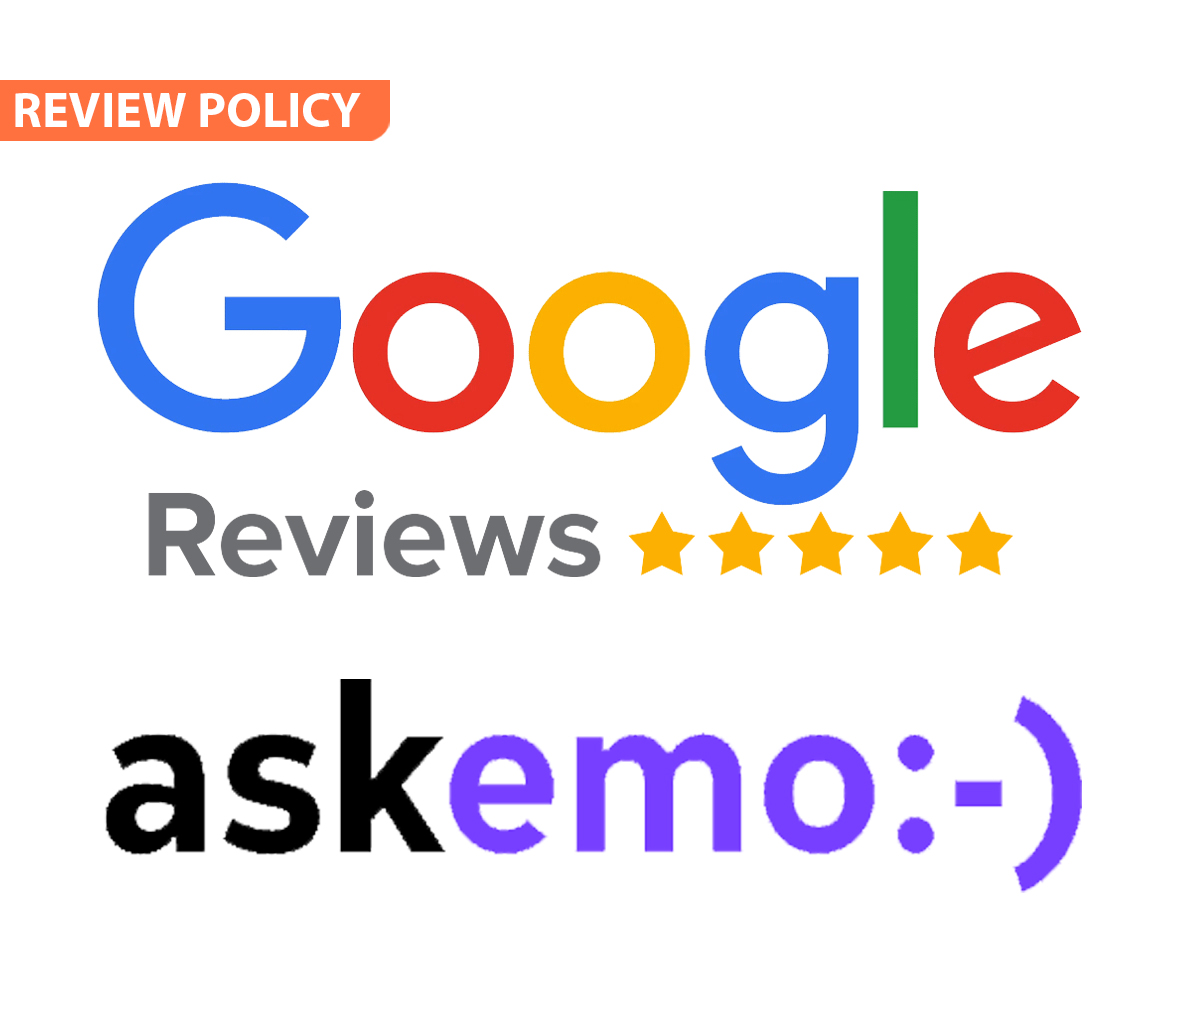 Review policy